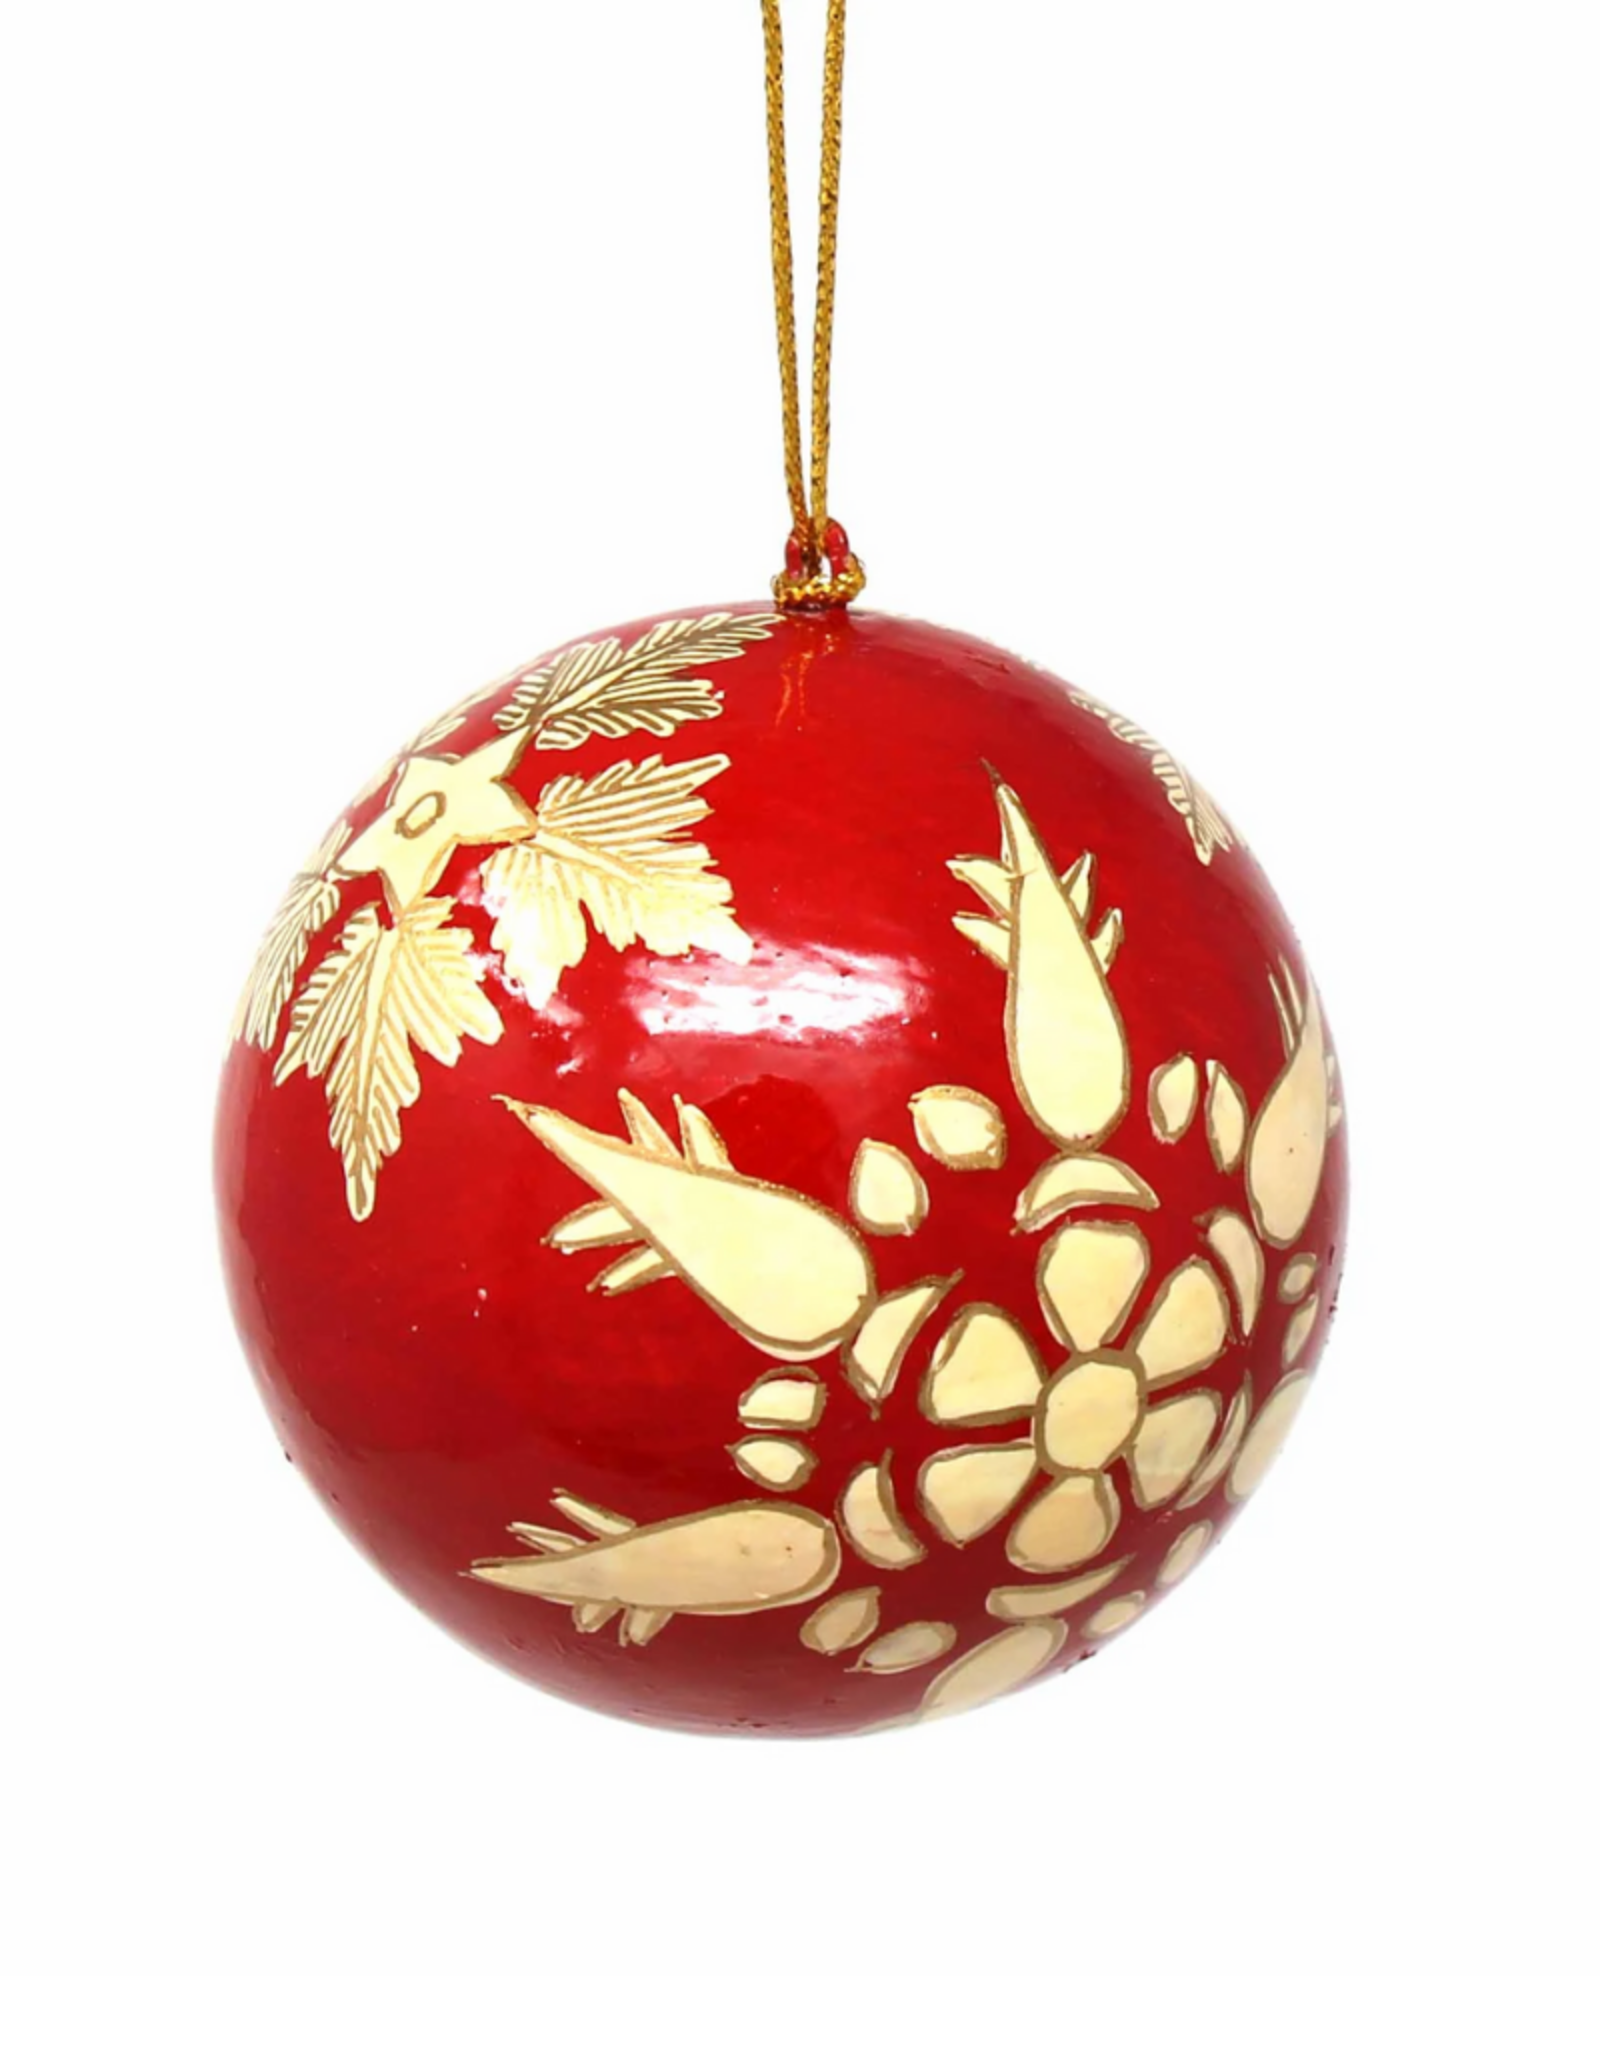 Global Crafts Ornament Handpainted Gold Snowflakes - India